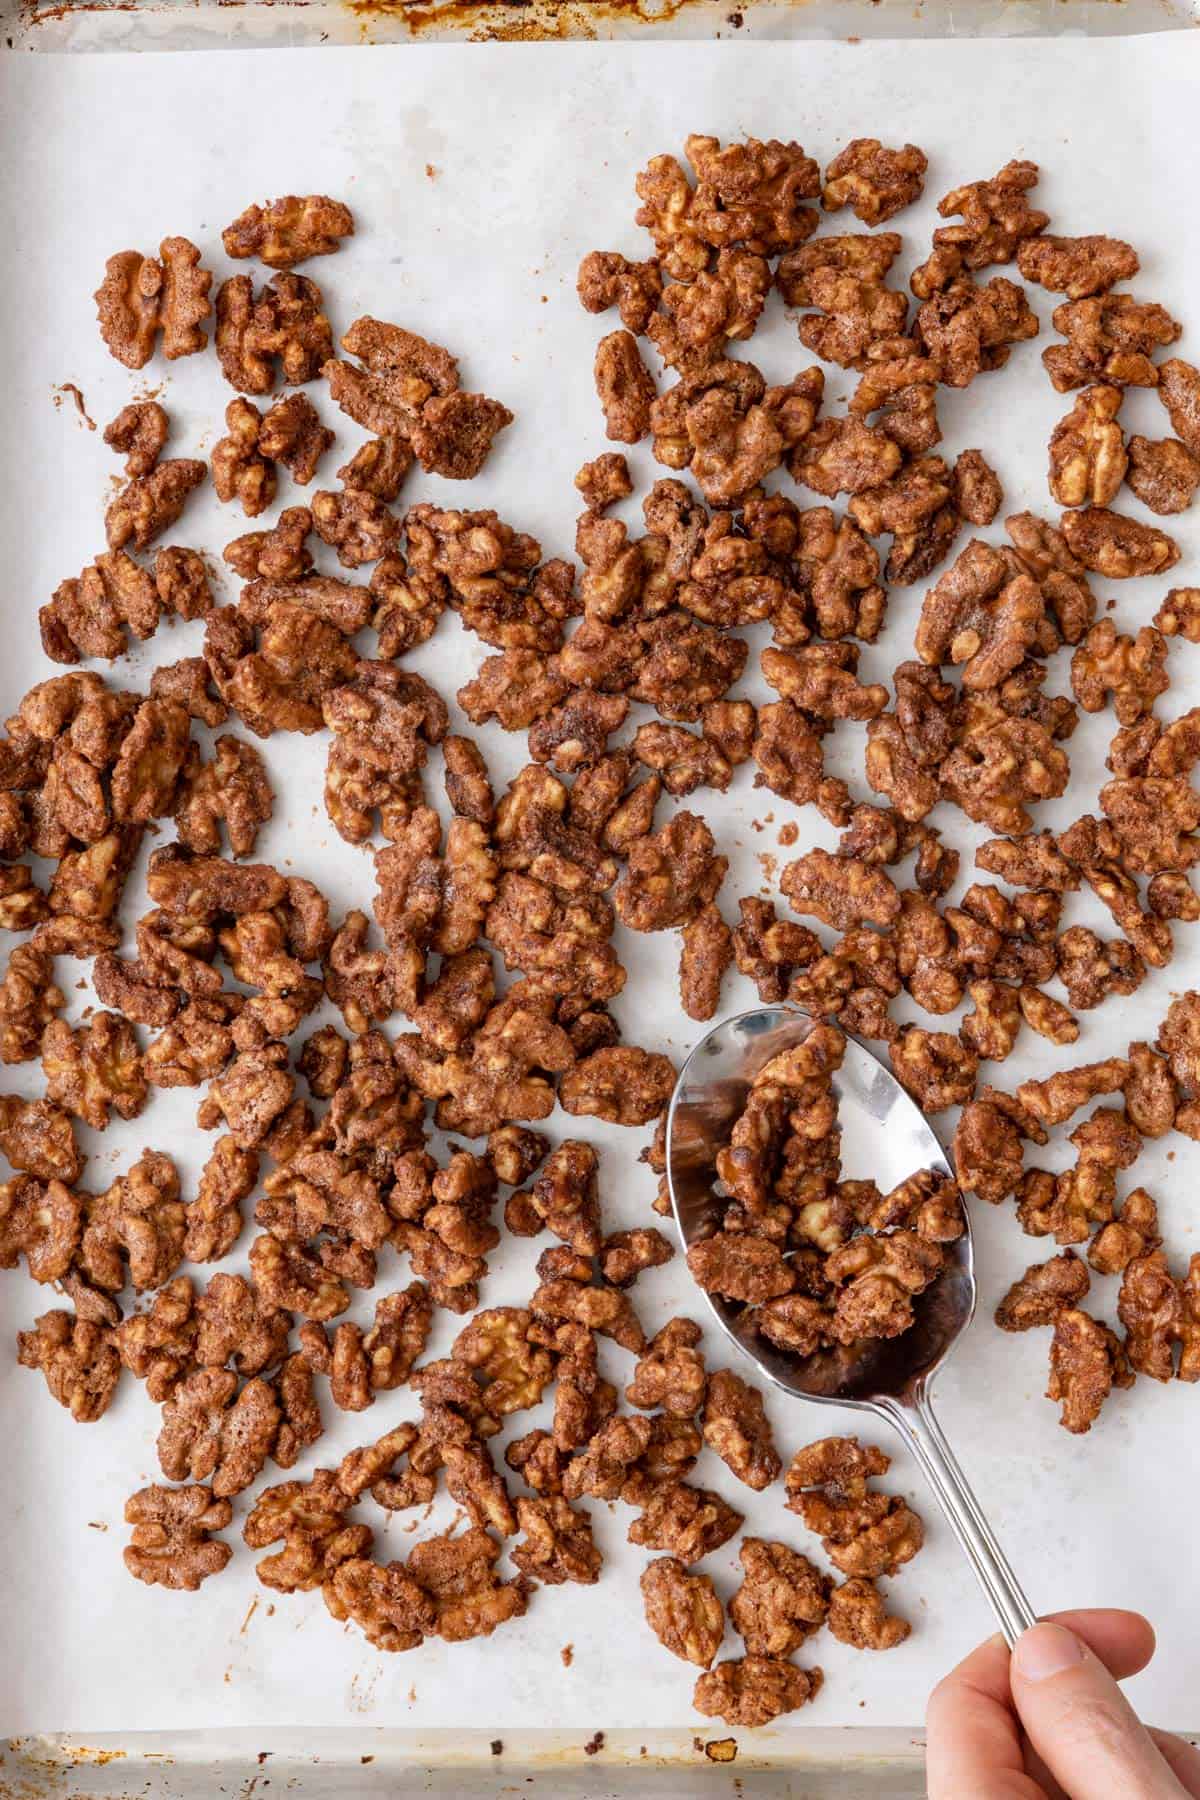 Spoon scooping up candied walnuts from parchment lined baking sheet.